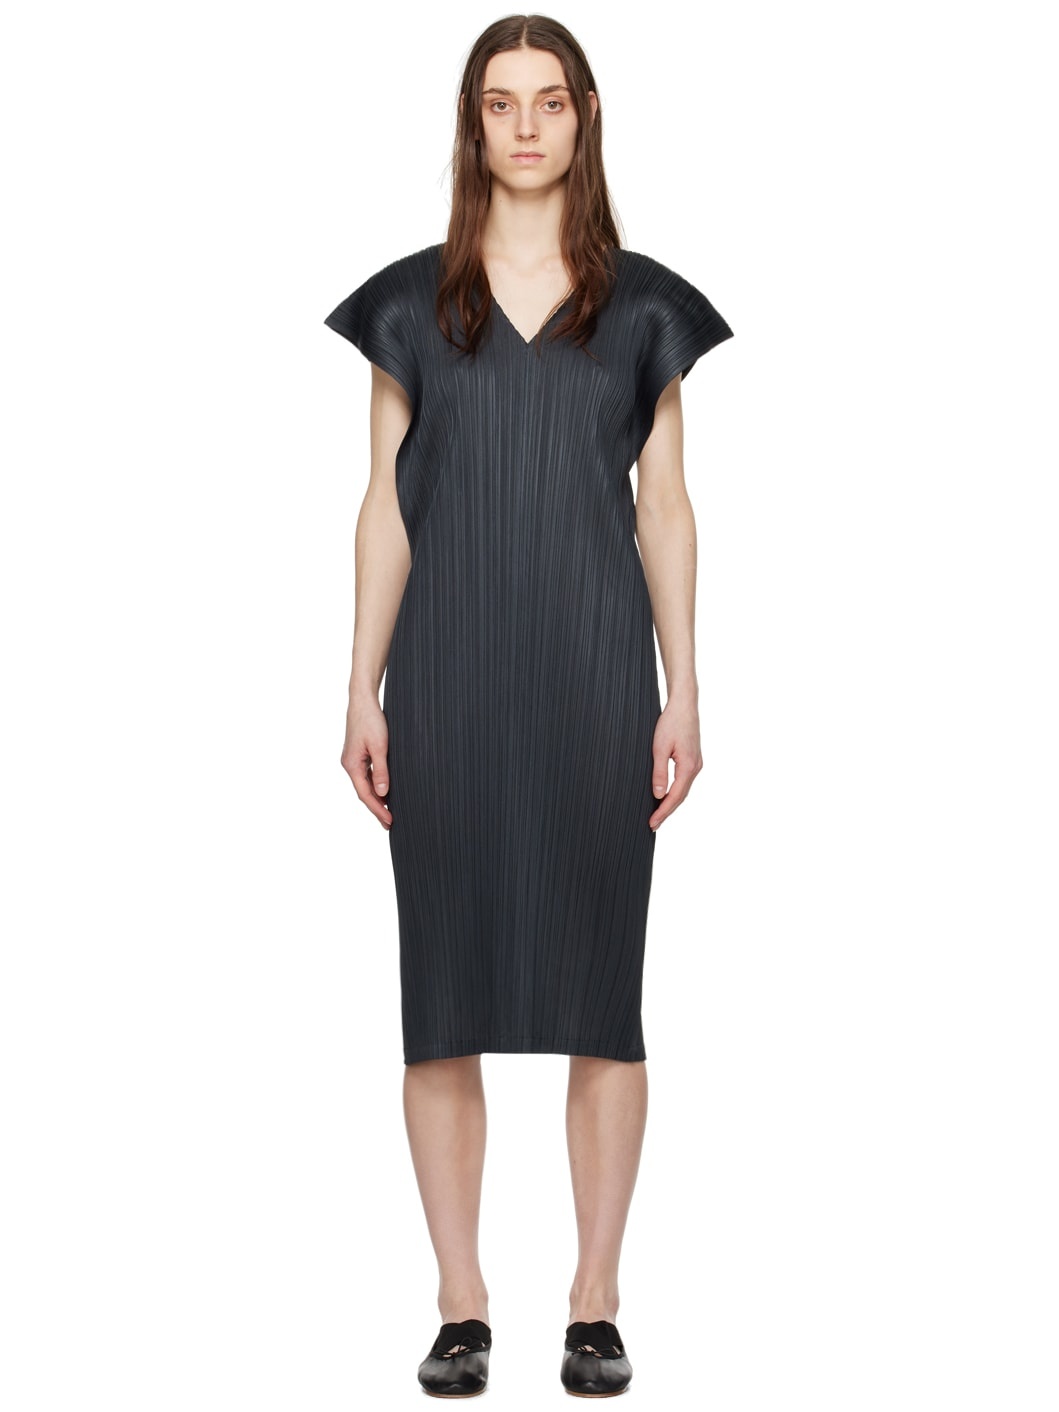 Gray Monthly Colors March Midi Dress - 1